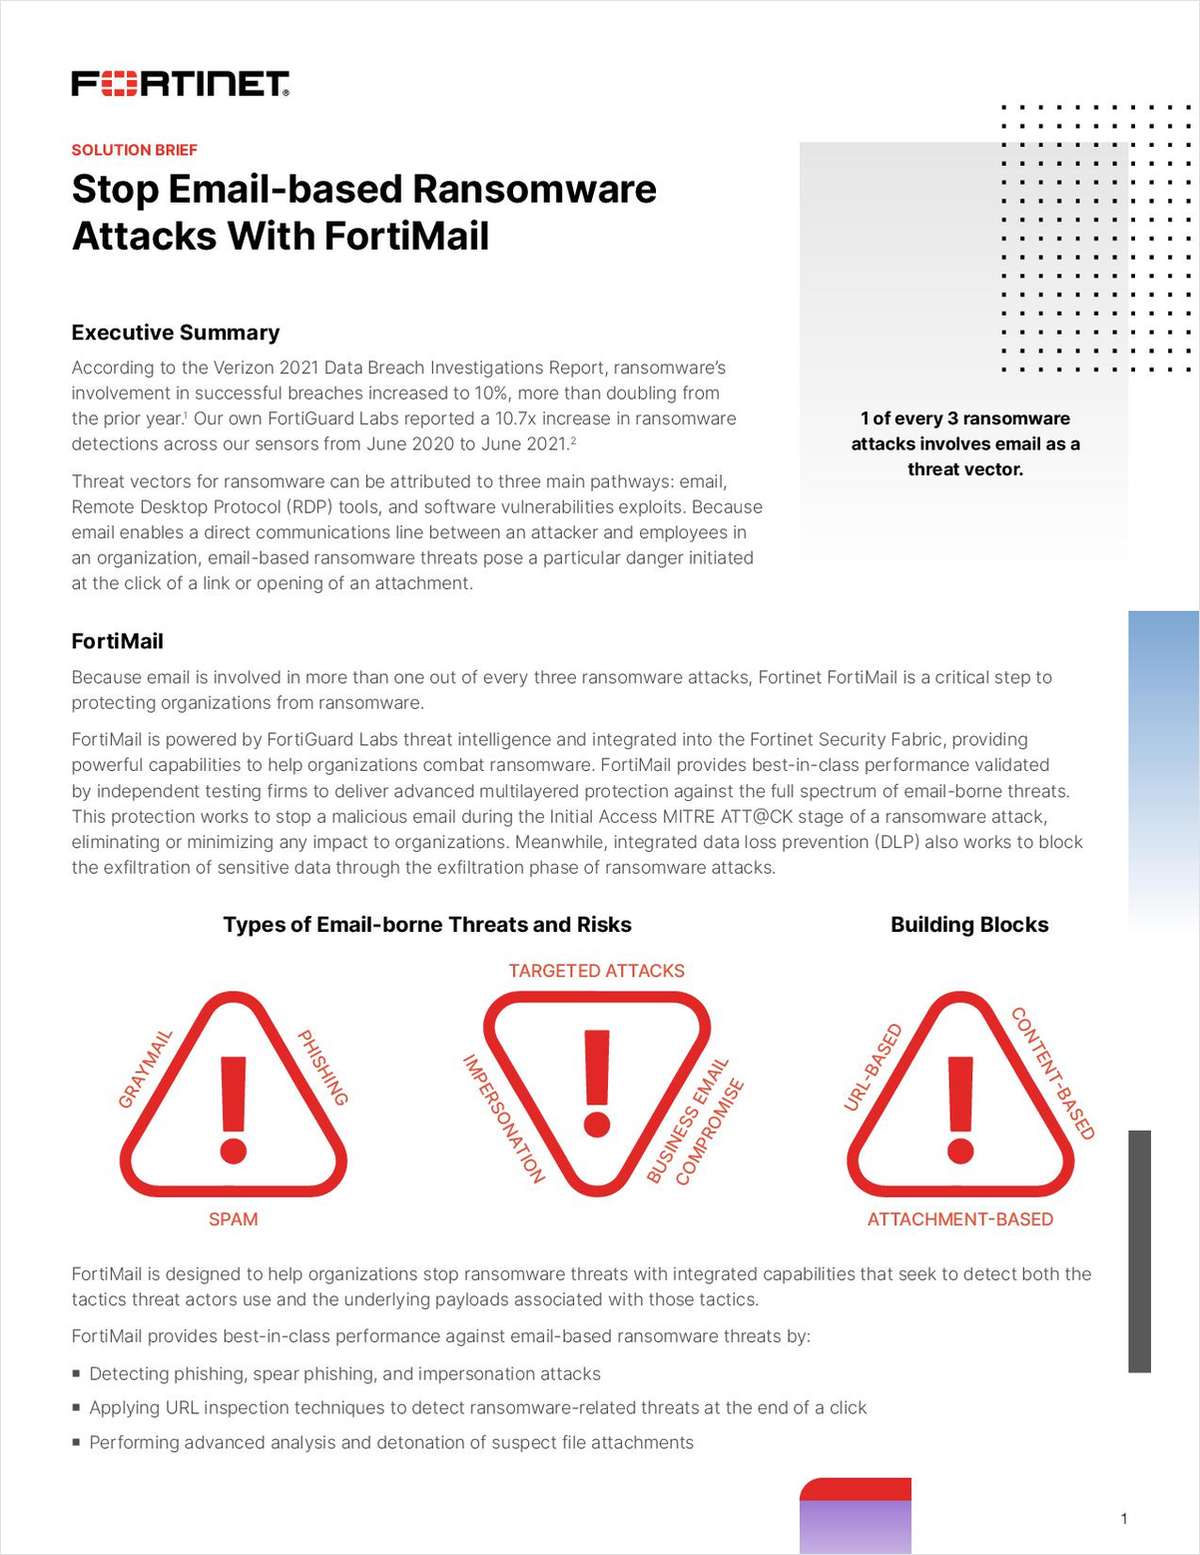 Stop Email-based Ransomware Attacks